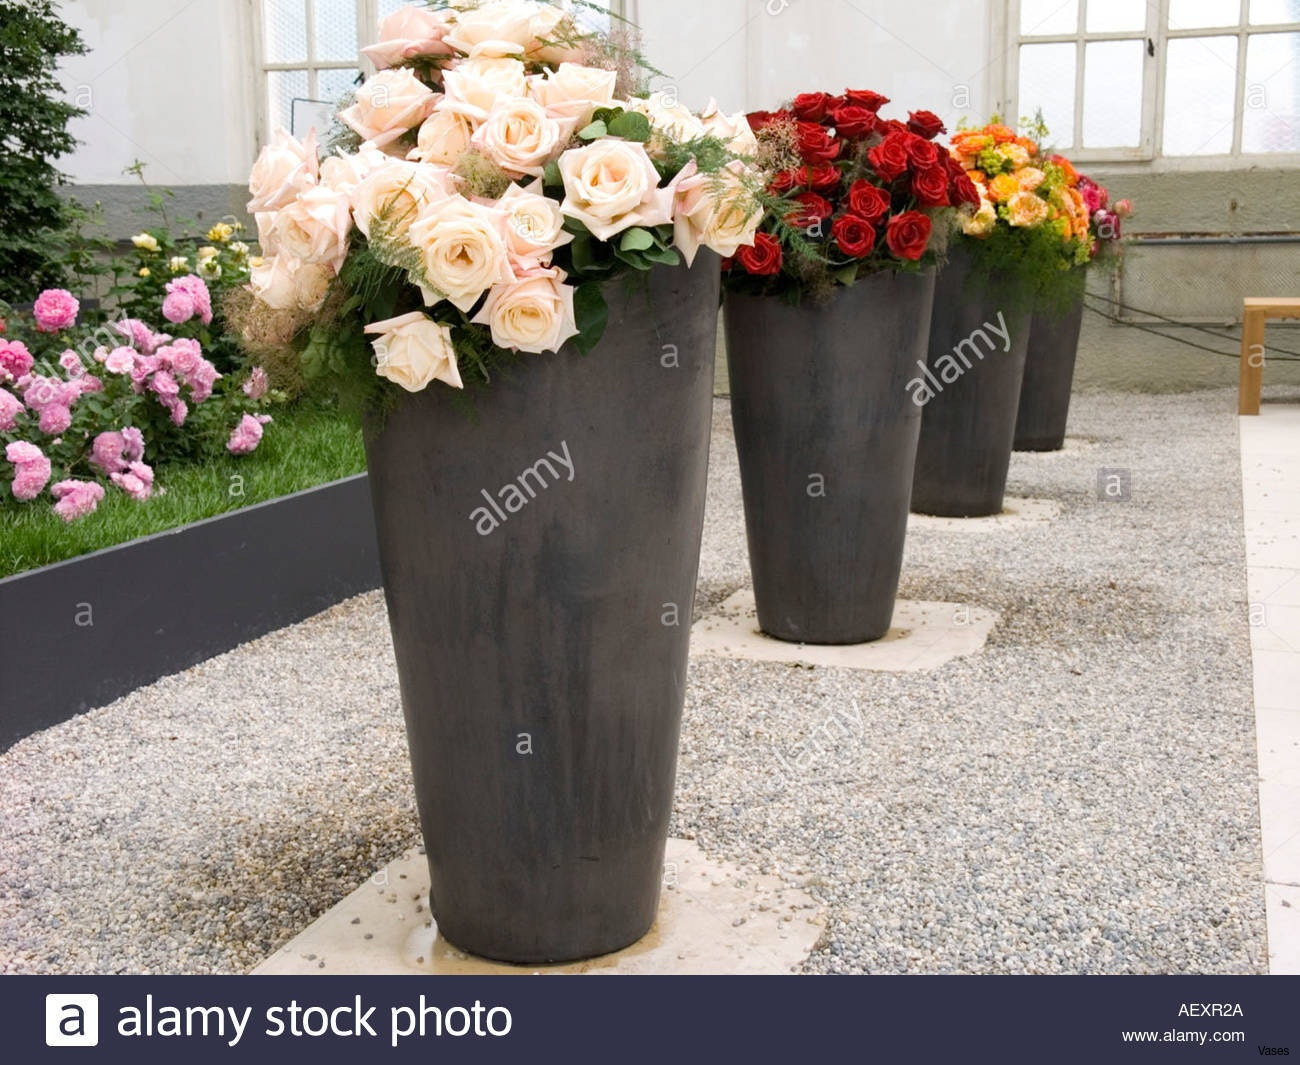 21 Lovable Extra Large Floor Vases 2024 free download extra large floor vases of pictures big vases for flowers drawings art sketch within articles with flower vases for sale tag big vase l vasei 0d uk